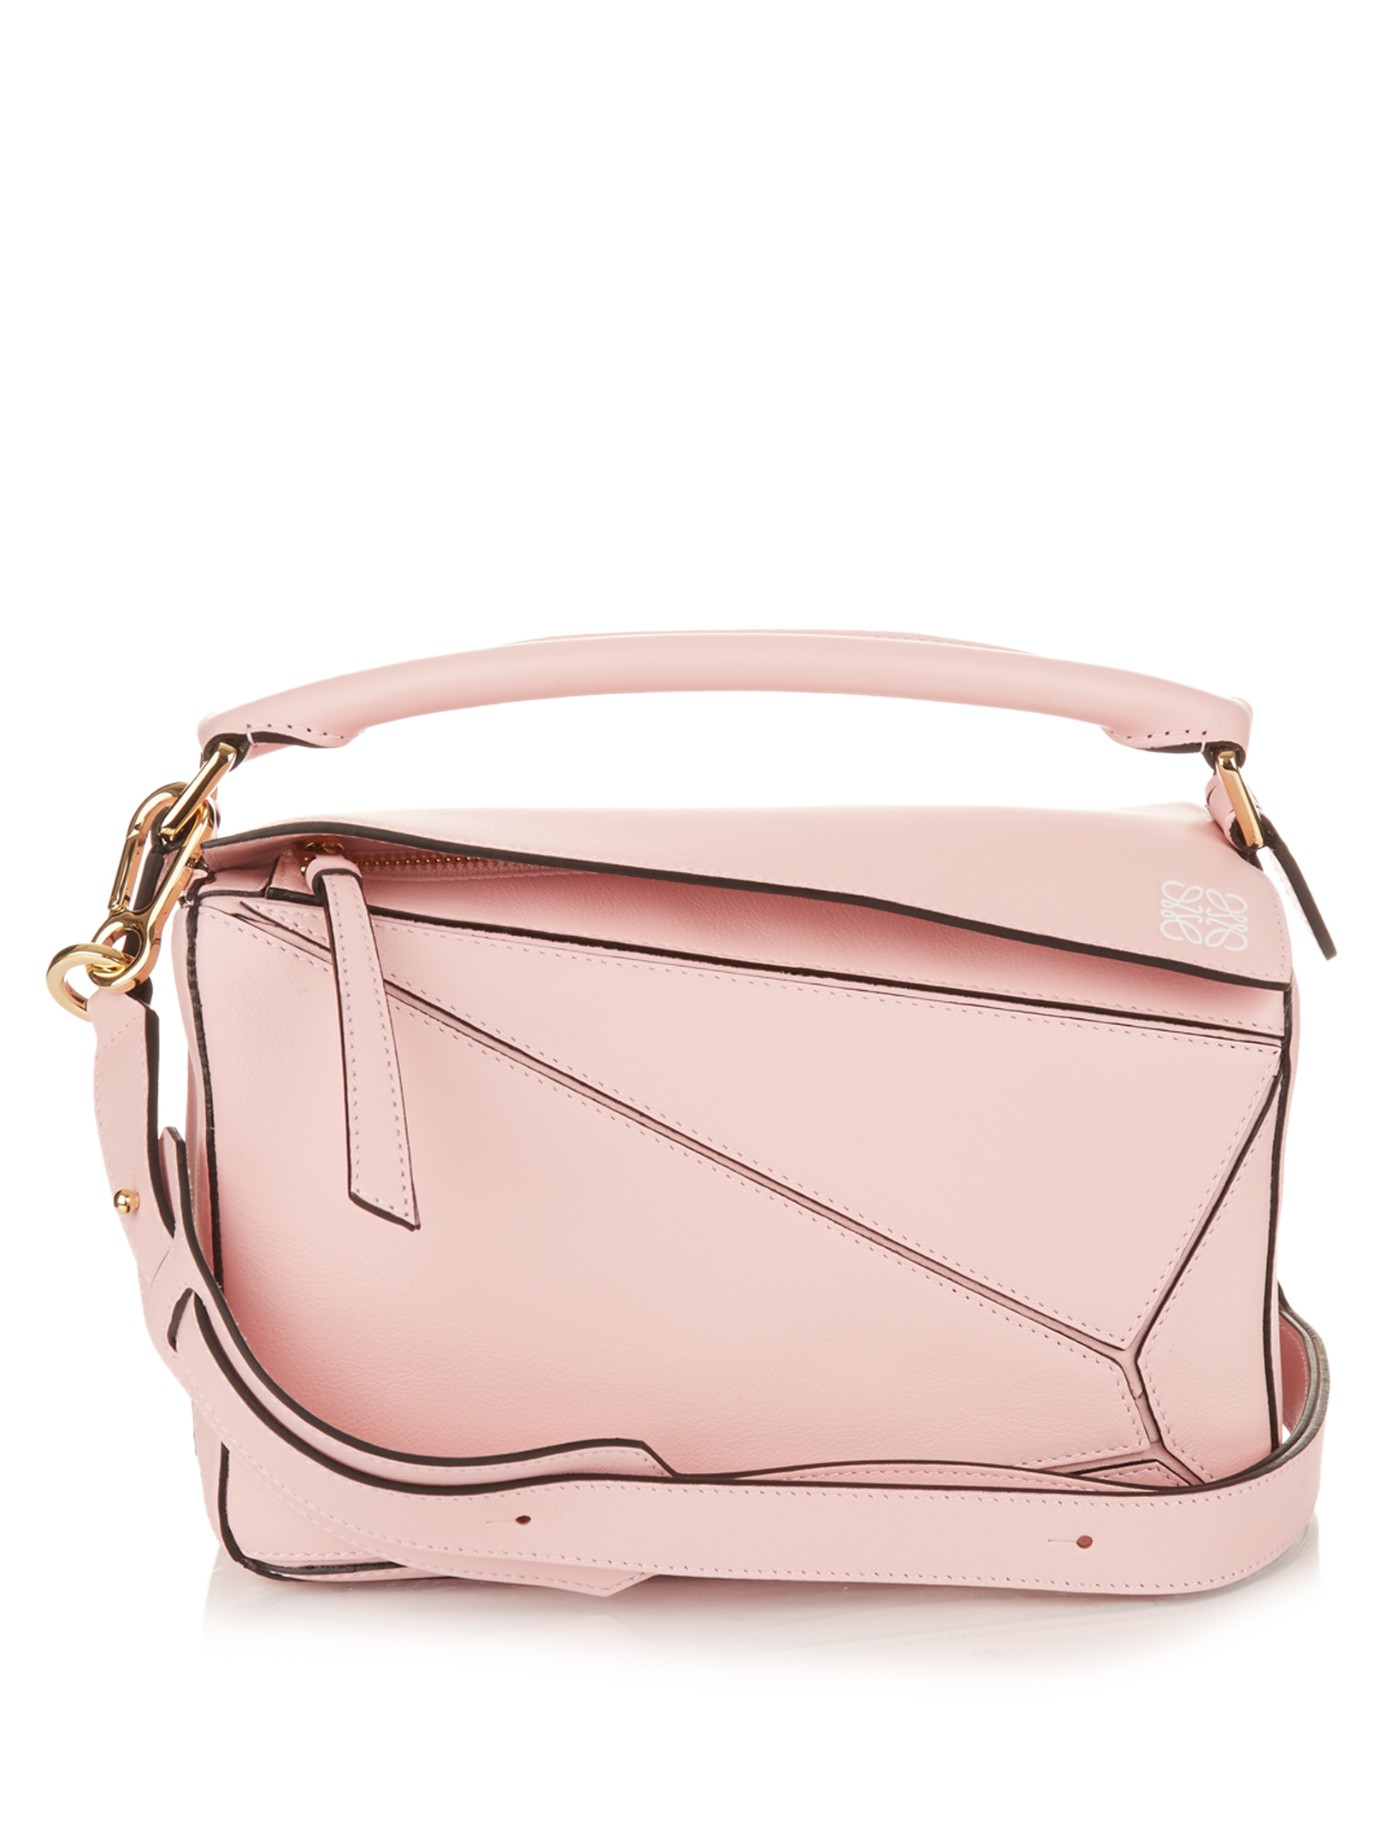 Loewe Puzzle Small Leather Bag in Pink